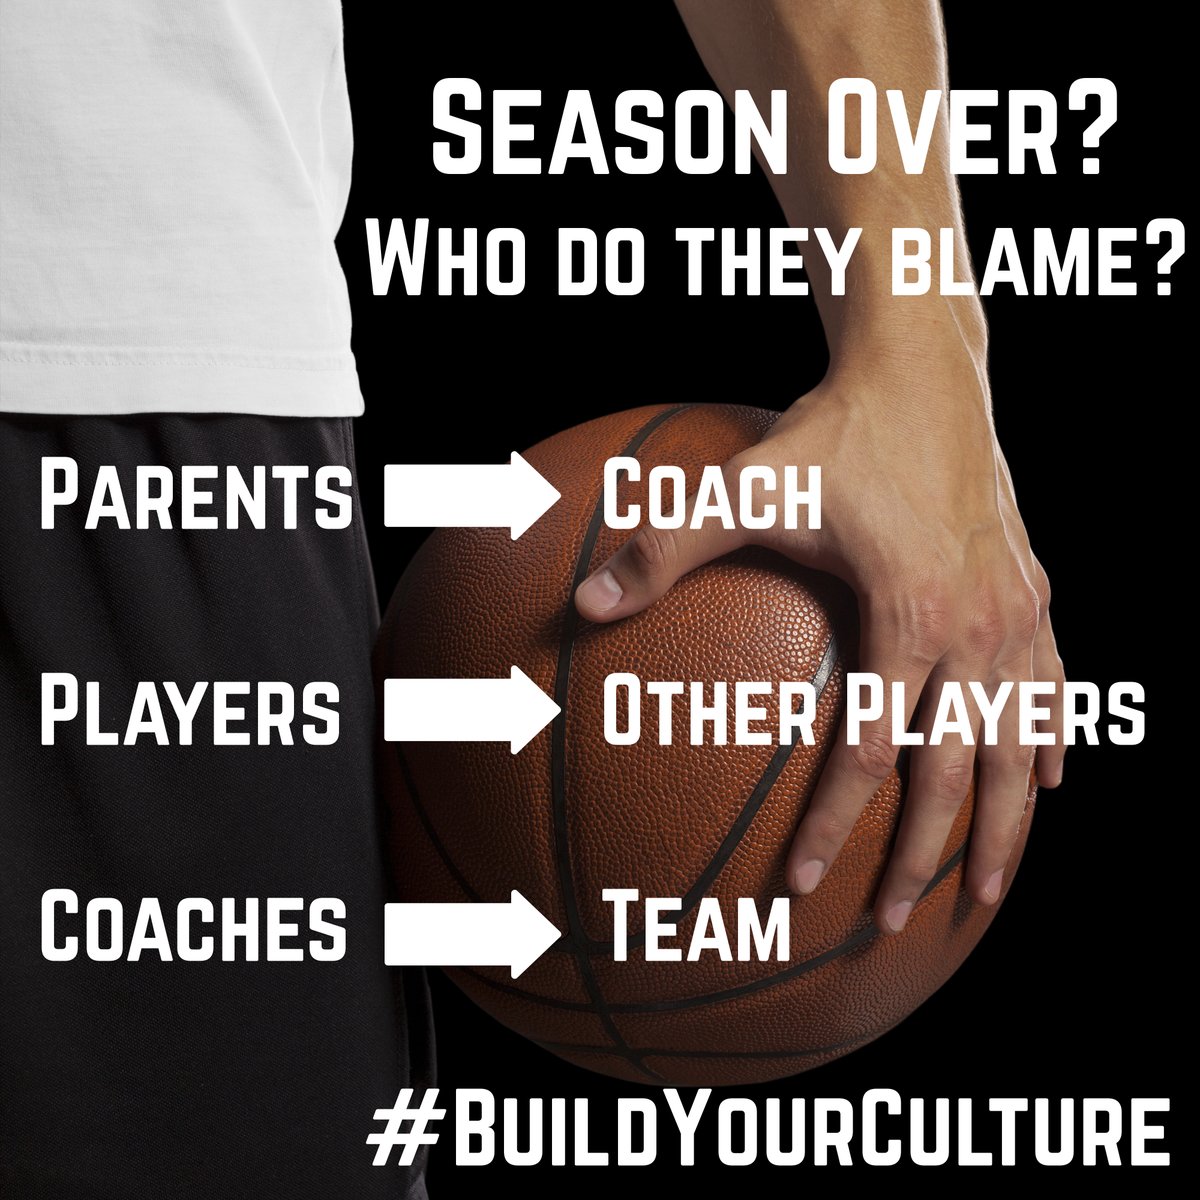 Once the season is over, the blame game starts. Everyone wants answers.

Great Teams = Great Cultures

What are you doing to #BuildYourCulture of winning? #BeBetterToday
#LeadersLead
#3PillarsOfImpact

Let’s work on your culture together.

beyondtoday.blog/blog/im-living…